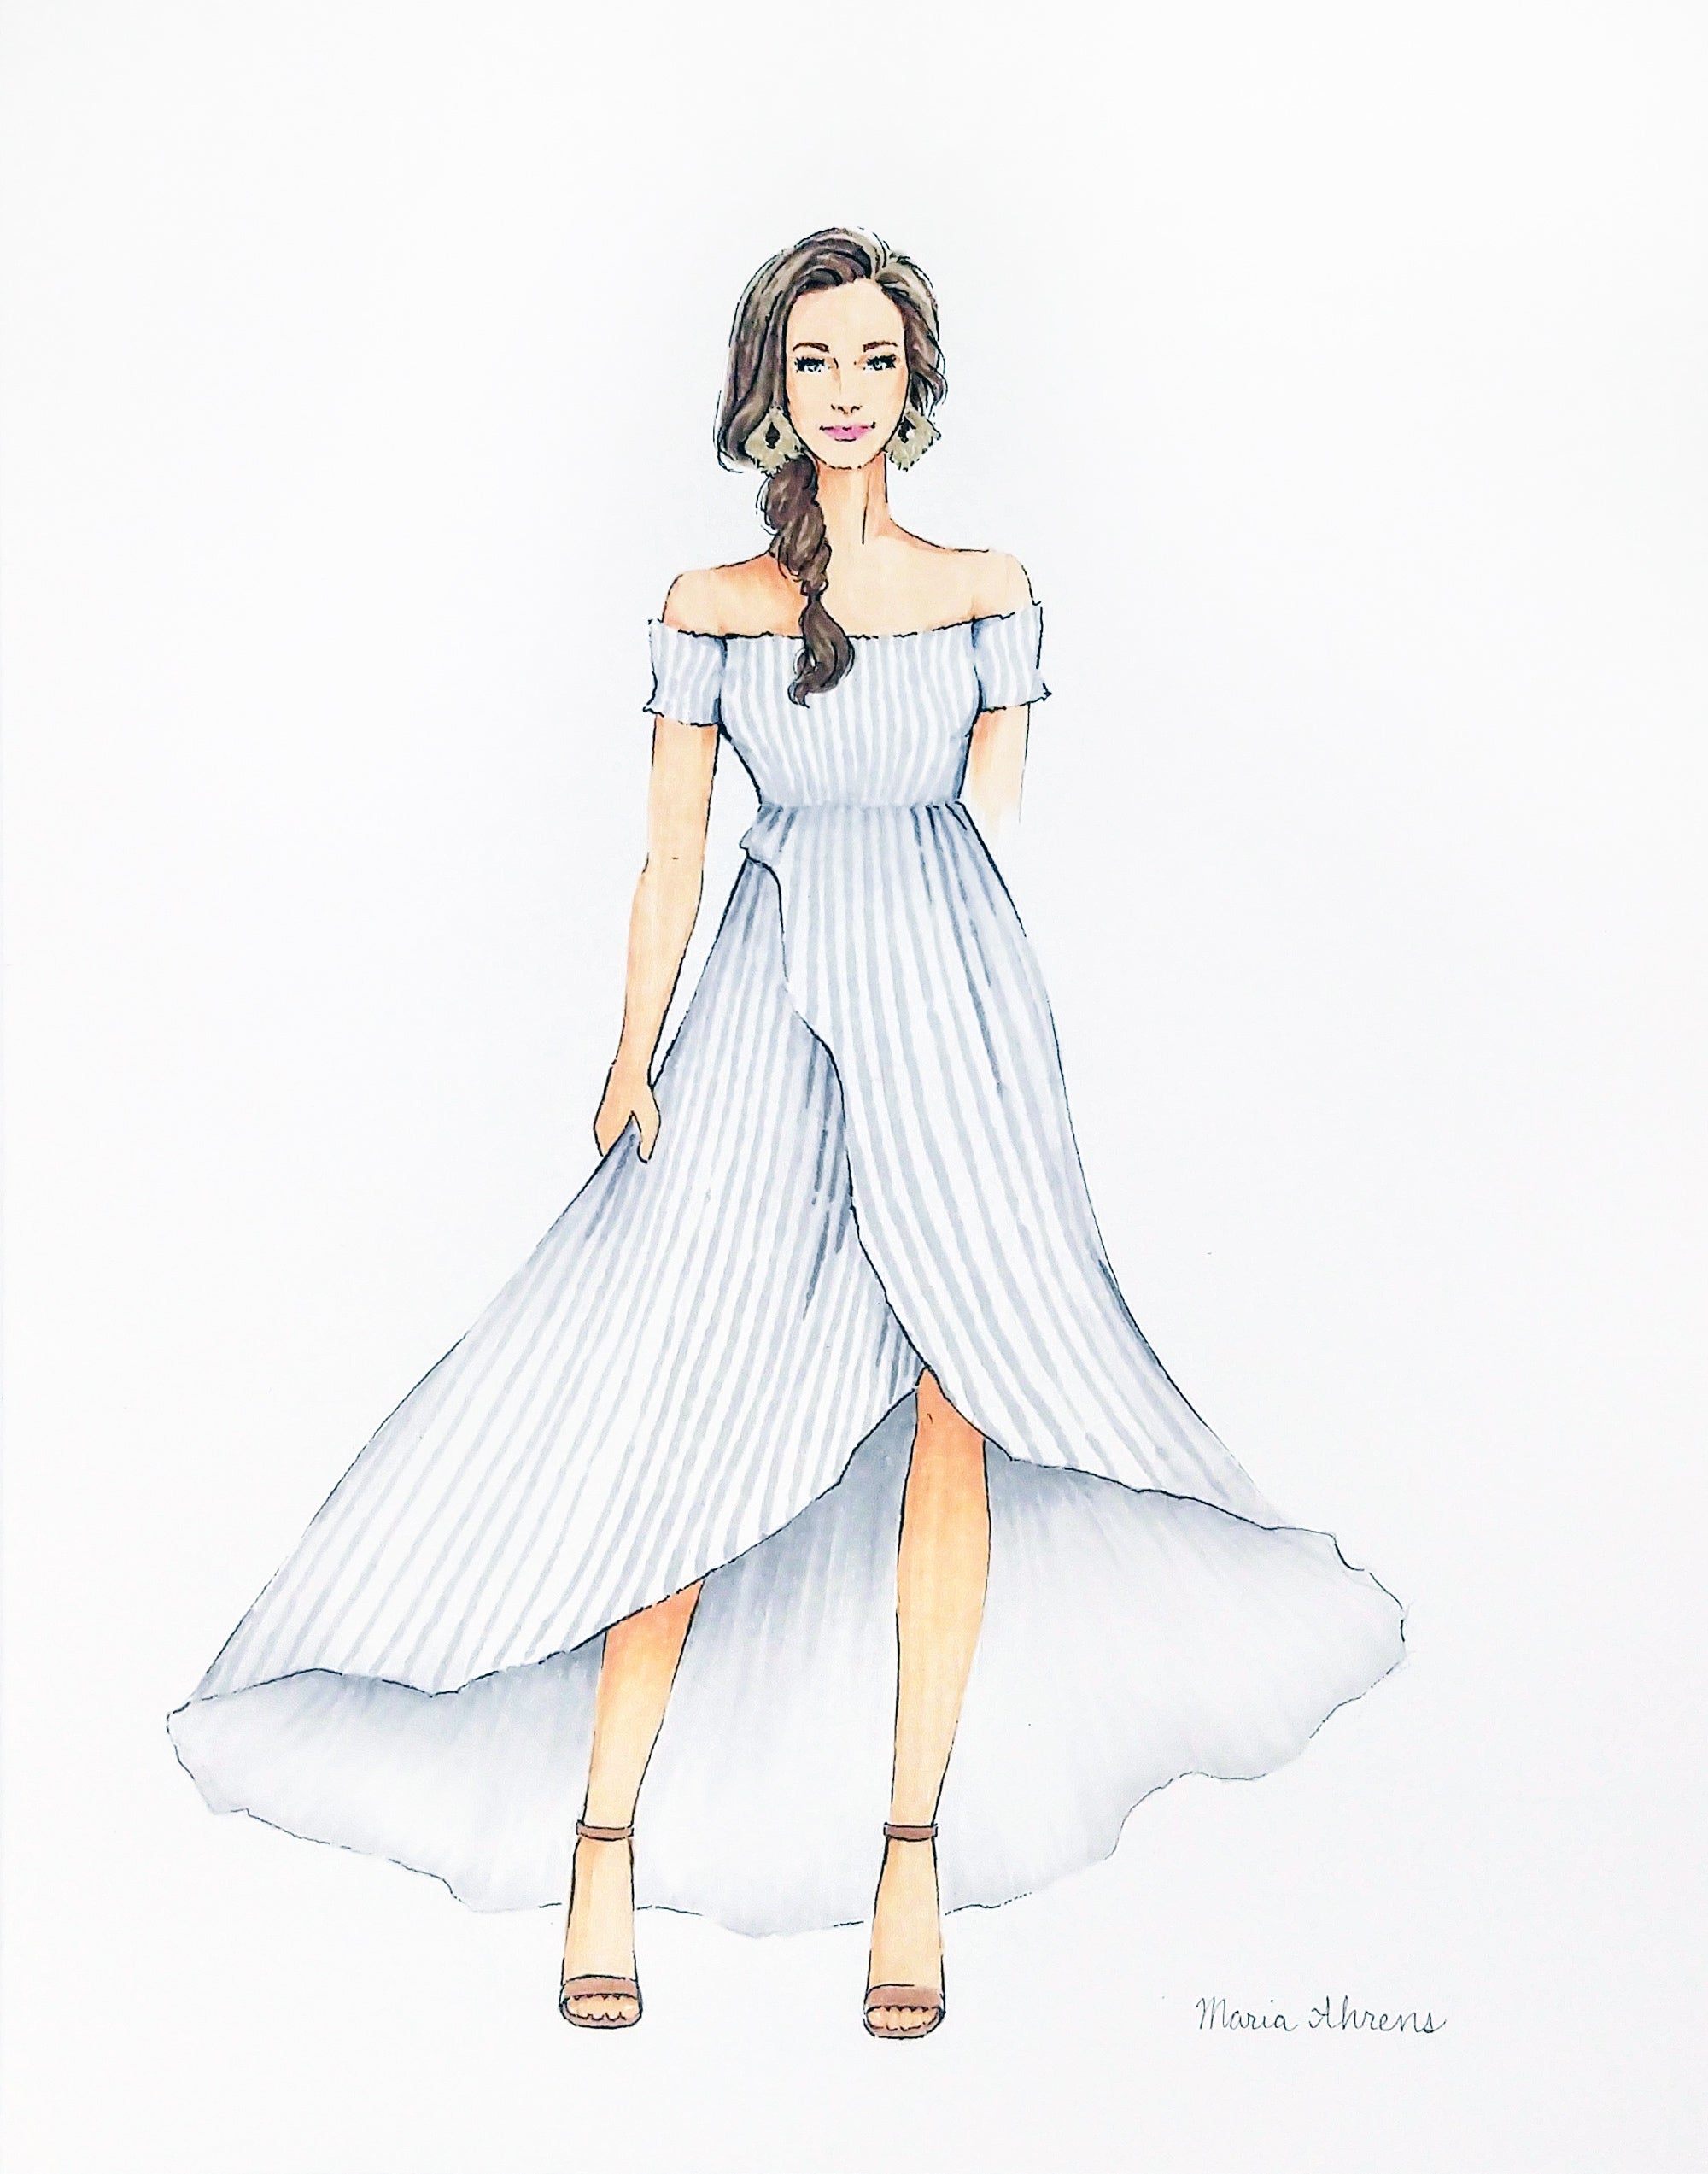 Learn to Draw Fashion Illustrations - Threads